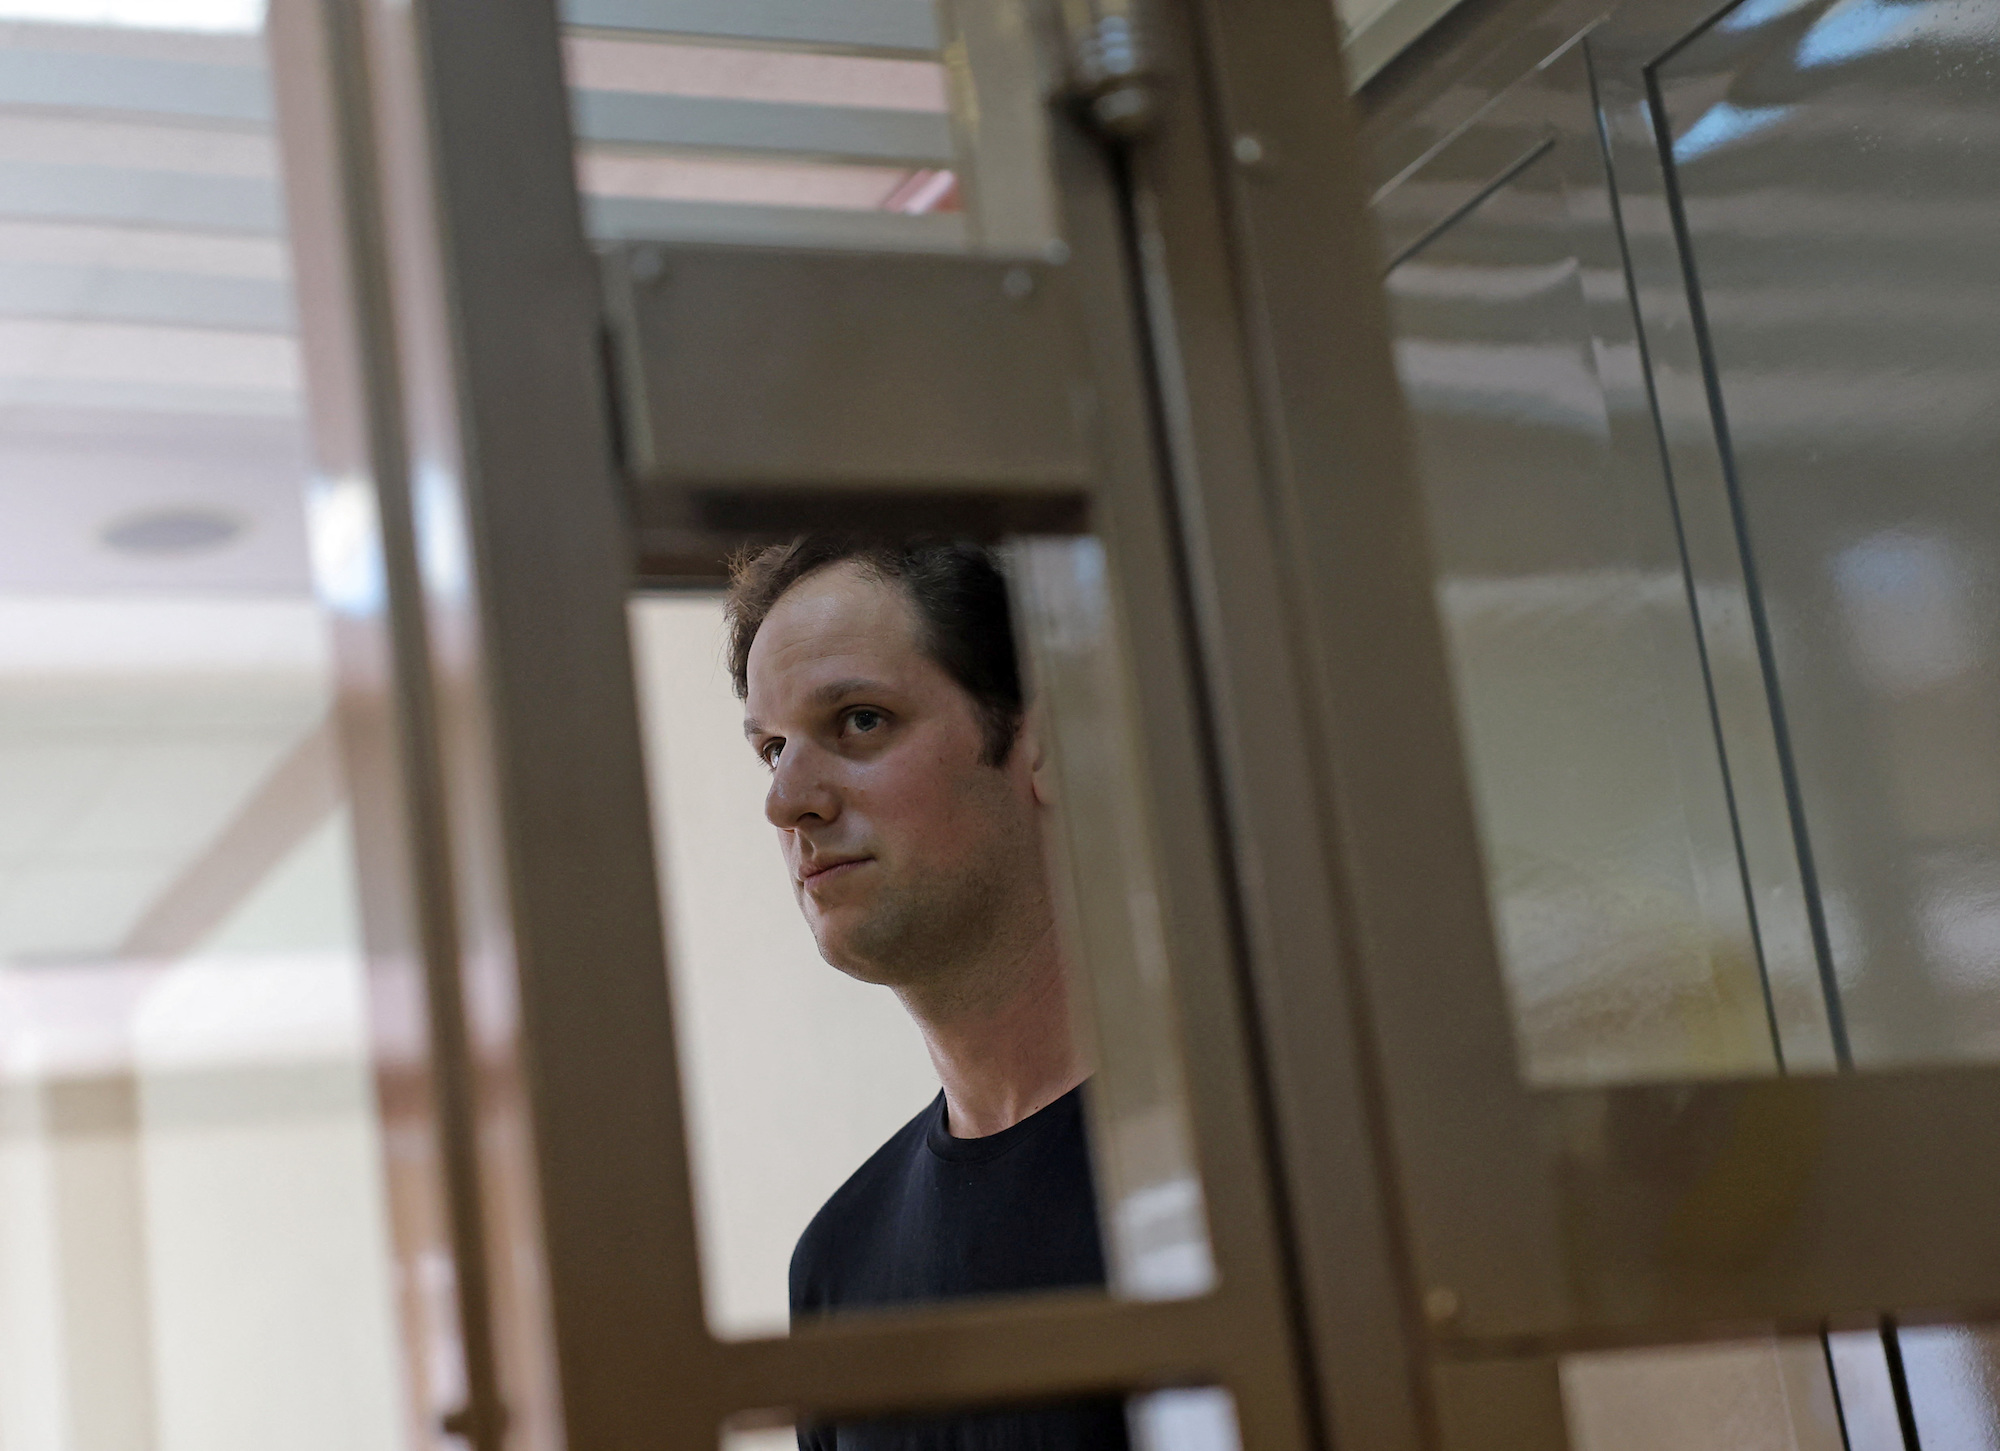 WSJ reporter Evan Gershkovich stands behind a glass wall of an enclosure at a court hearing in Moscow on Thursday.